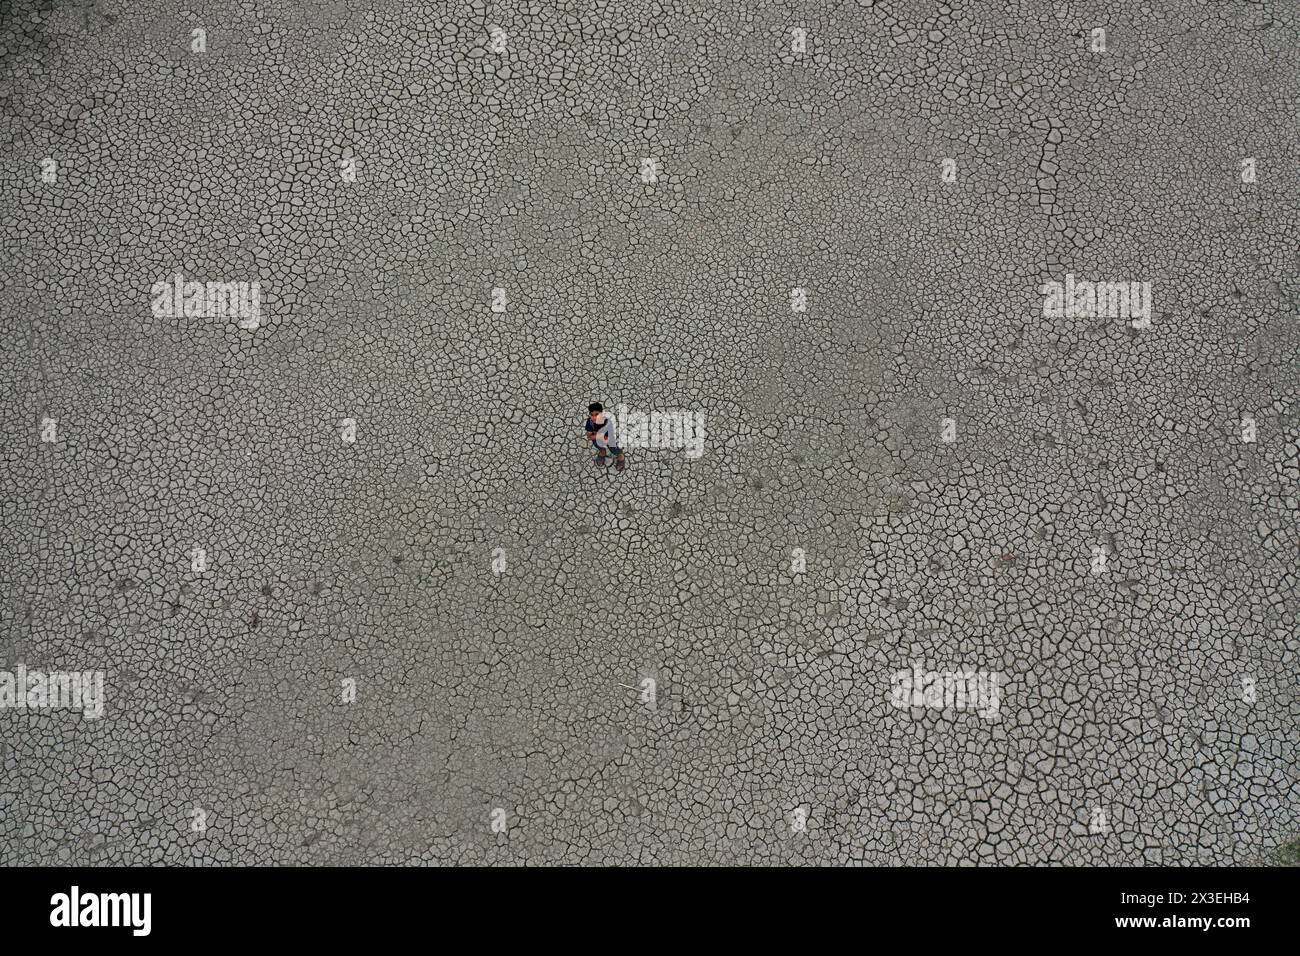 Khulna, Bangladesh - April 11, 2024: The intense heat of summer, the water has dried up and the soil has burst in the coastal region of Khulna distric Stock Photo